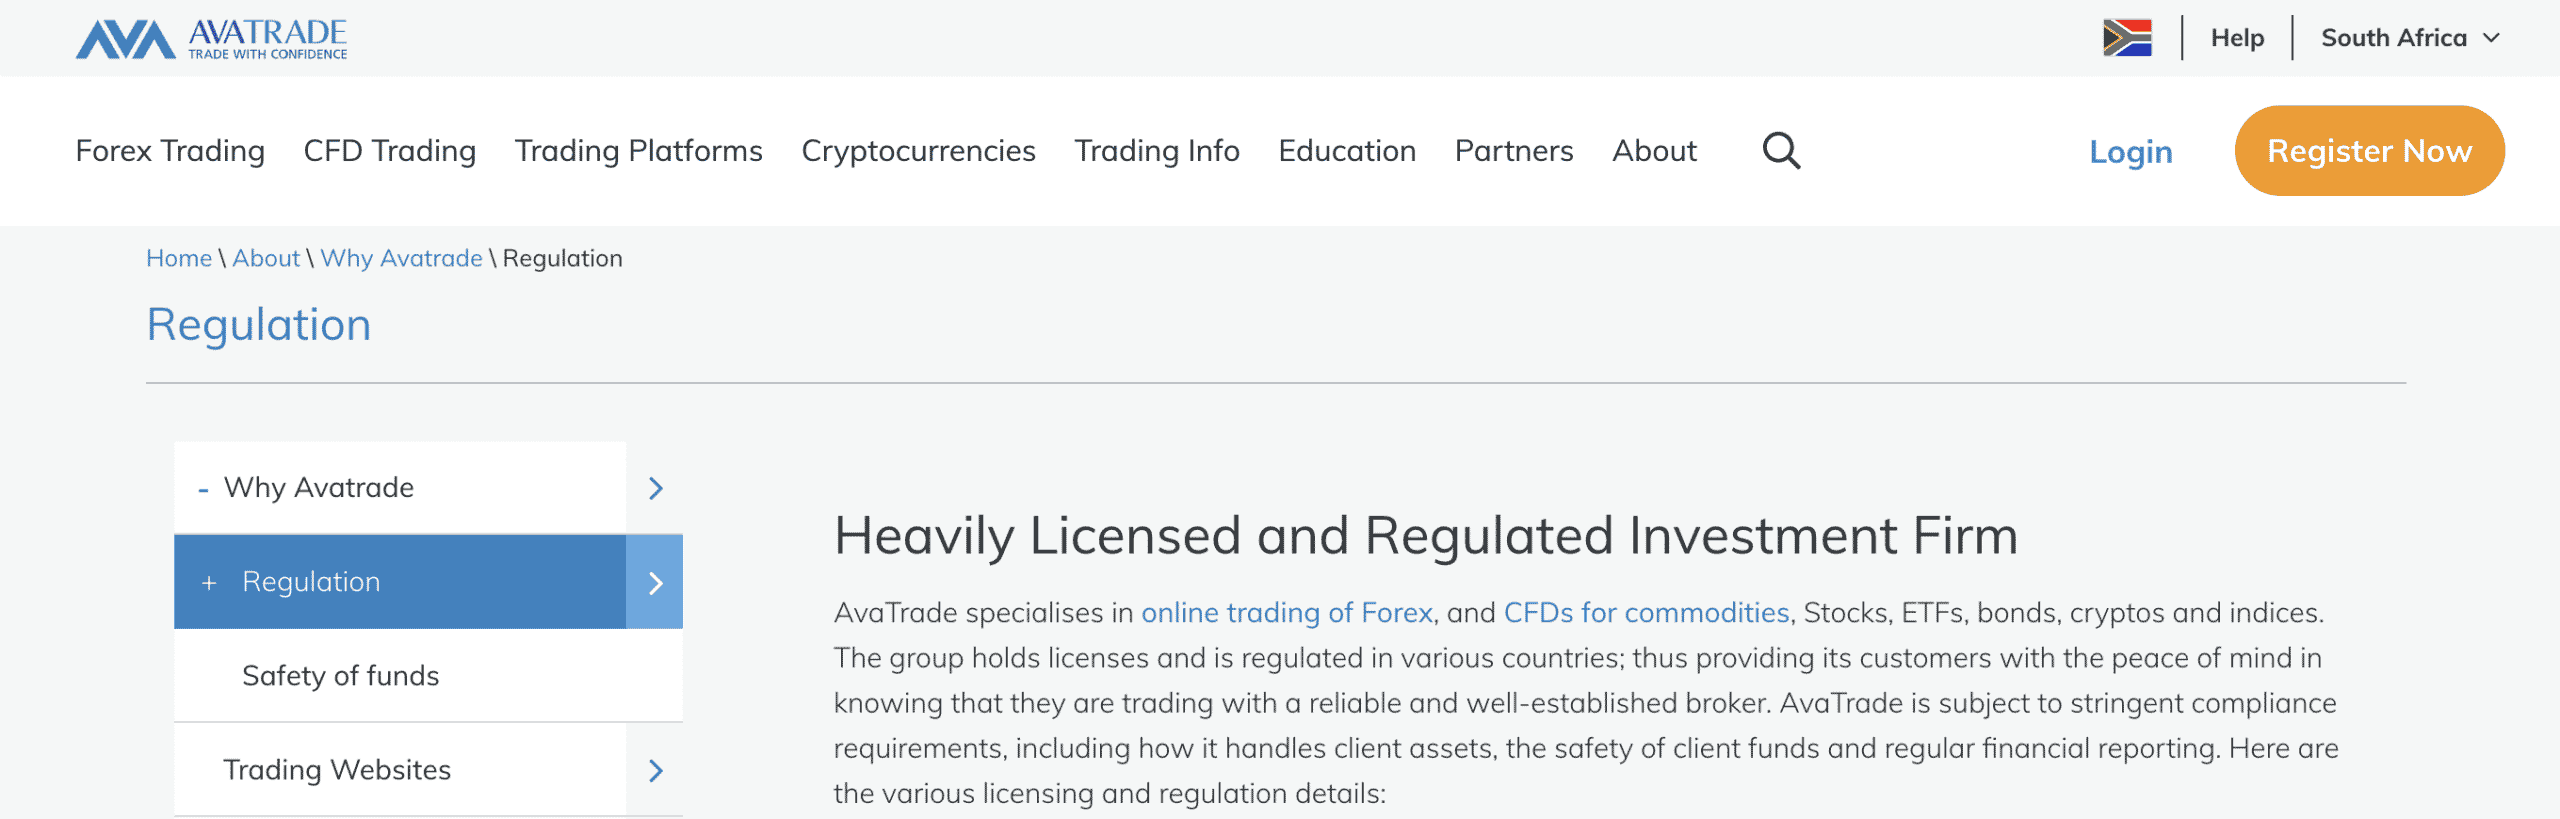 AvaTrade Regulation and Safety of Funds